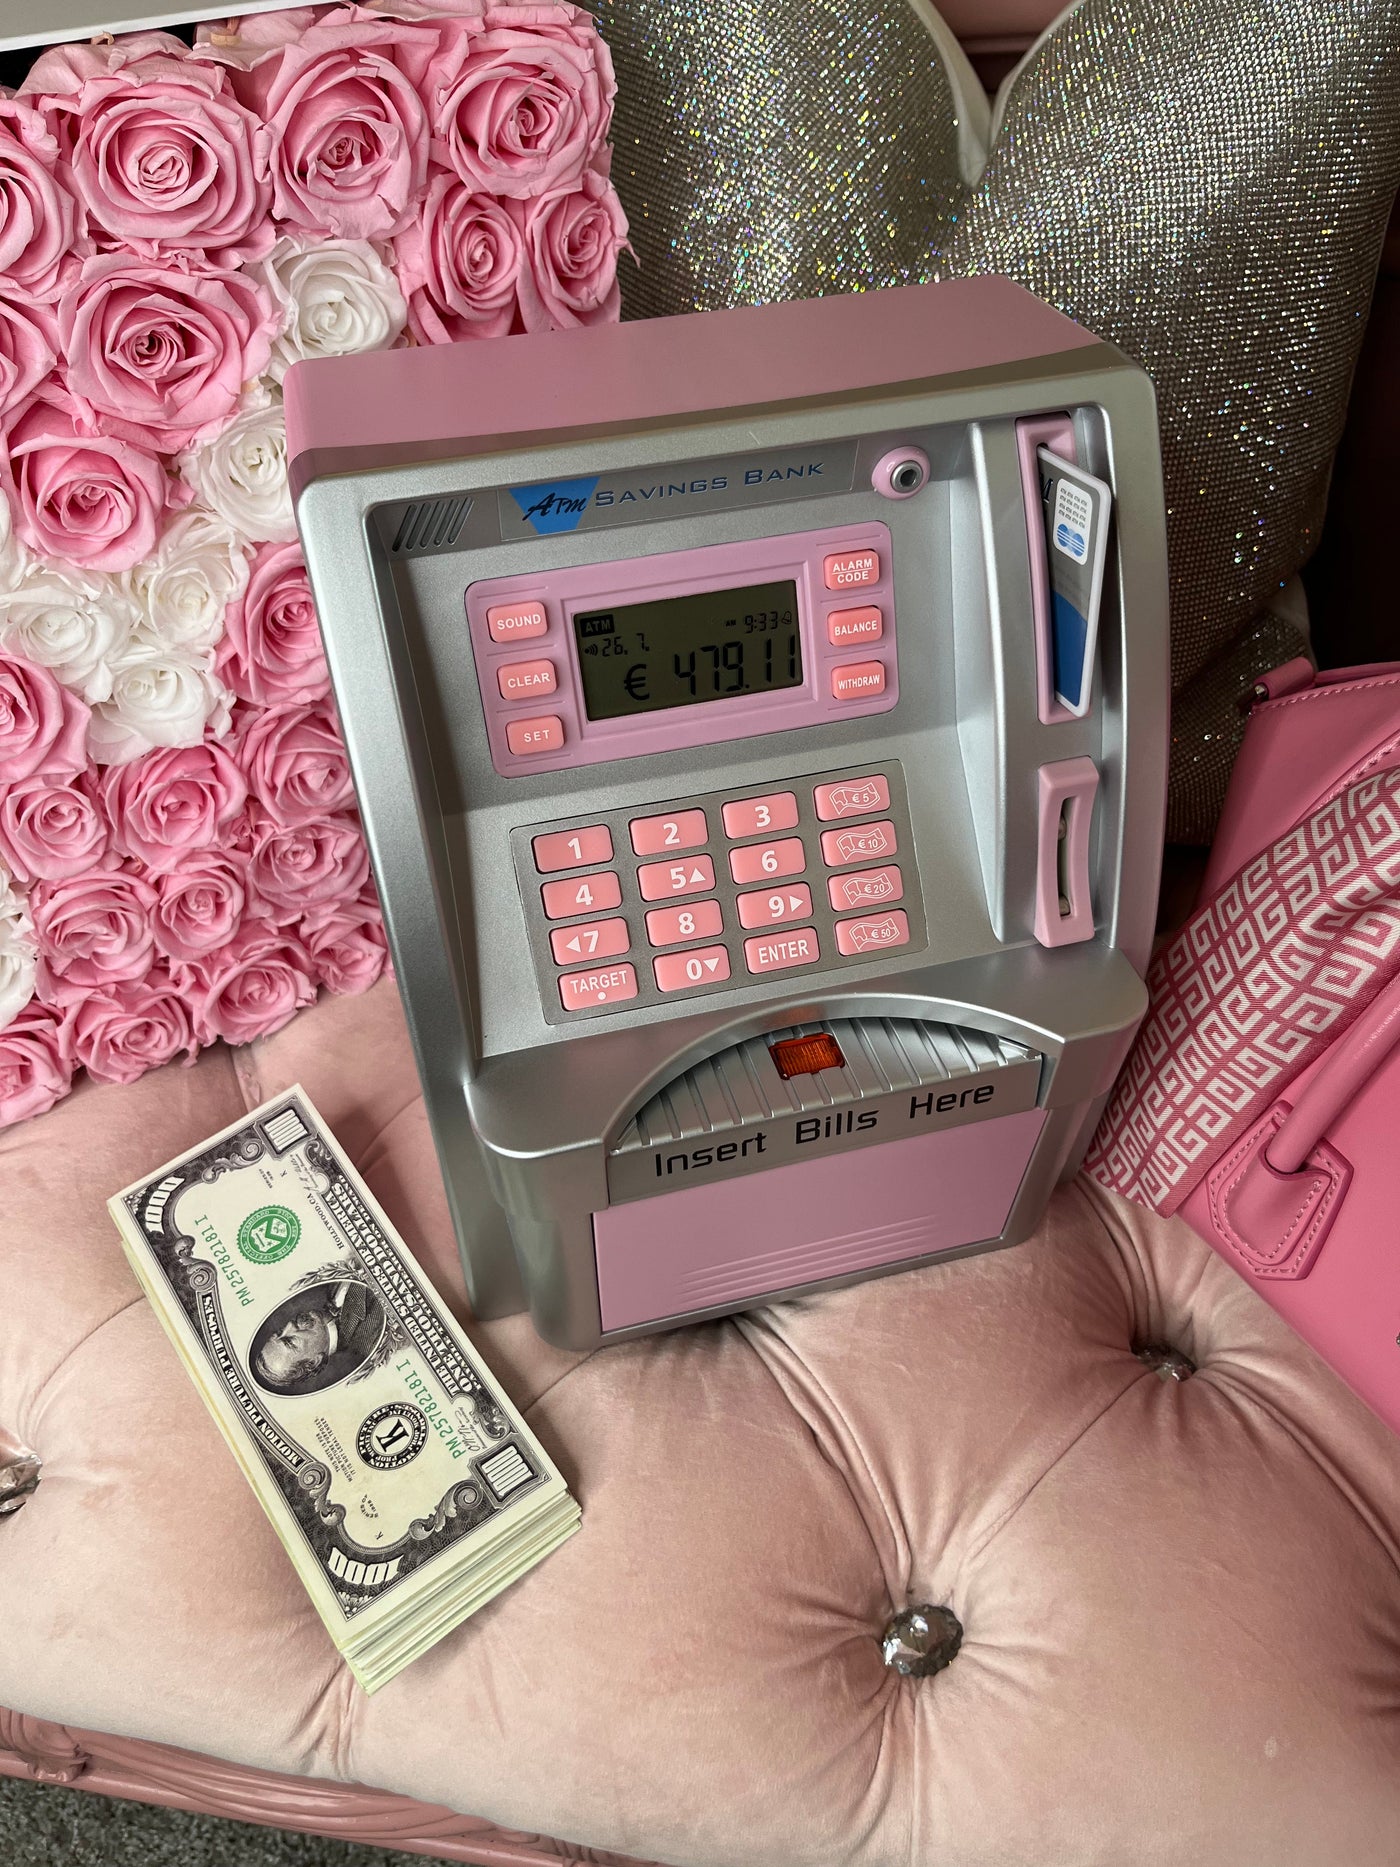 RICH GIRL ATM SAVINGS BANK (PREORDER SHIPS IN 7/10 BUSINESS DAYS)